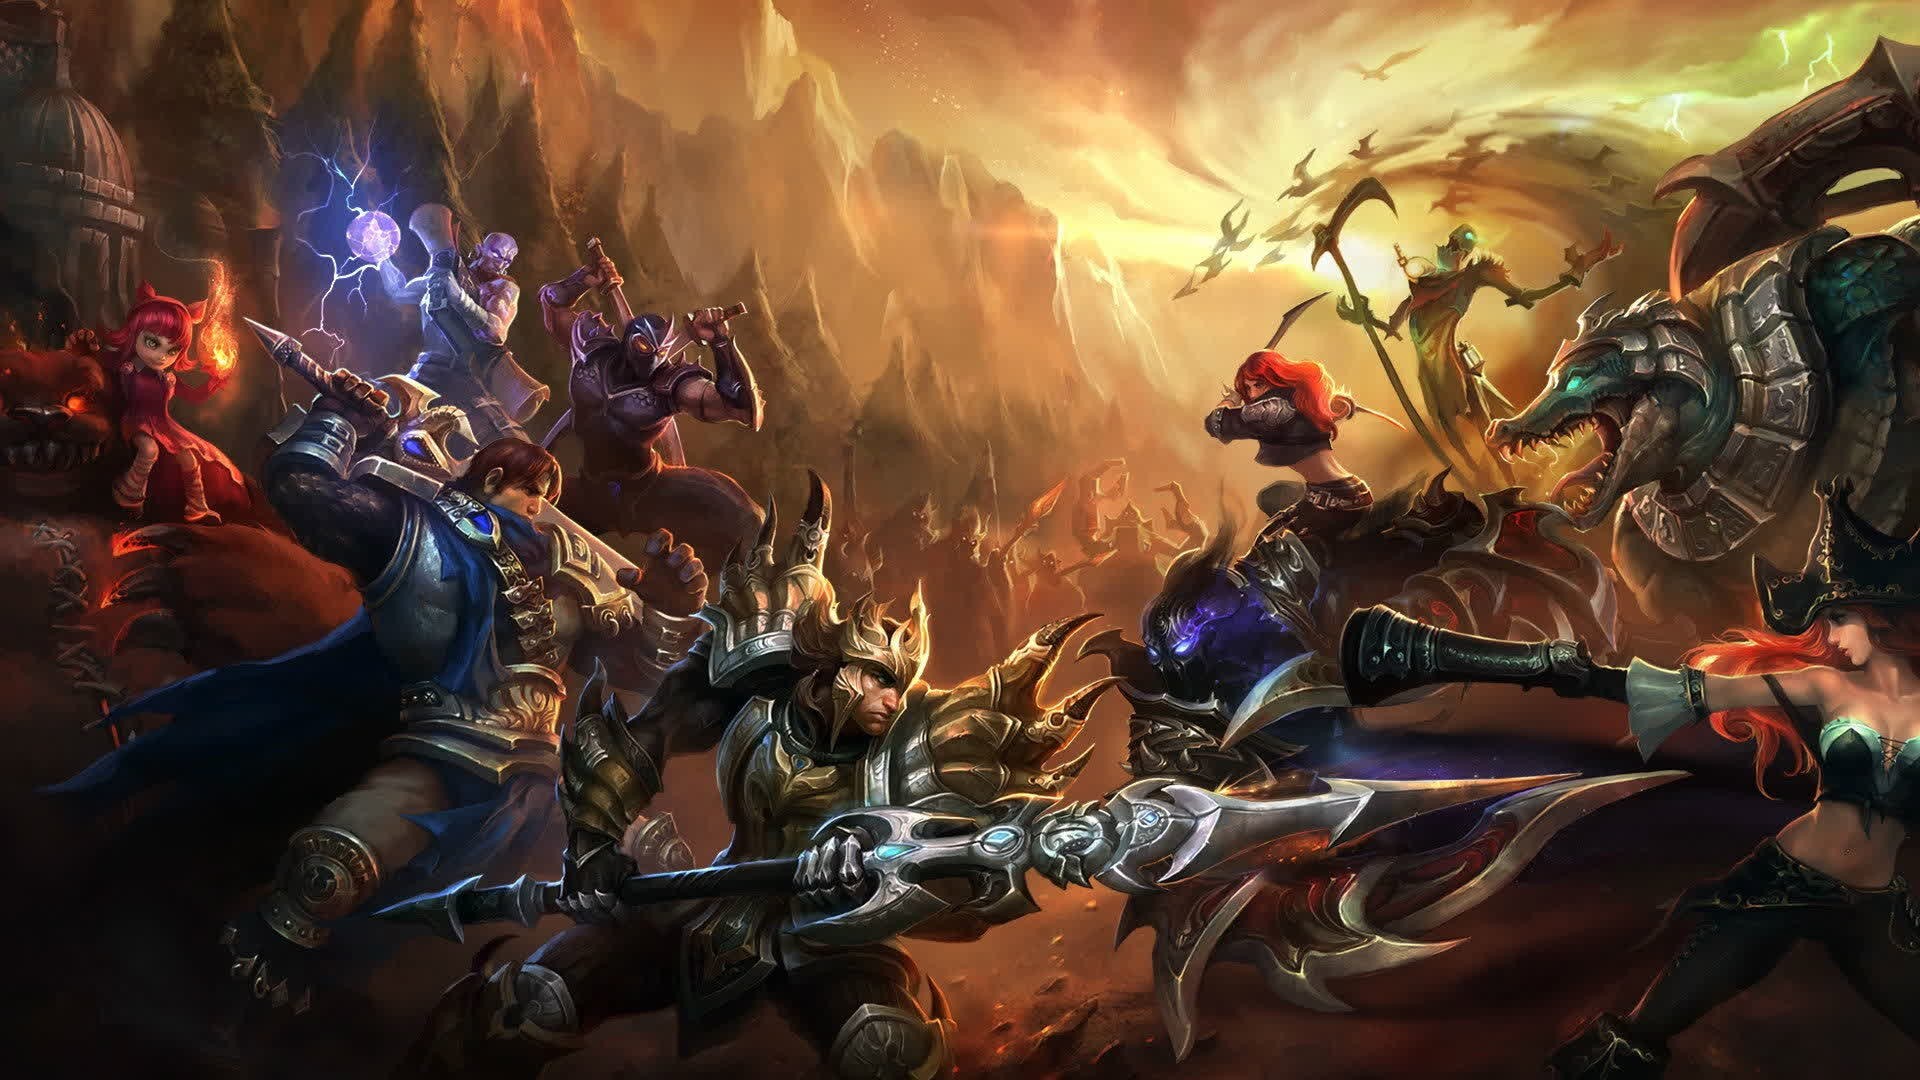 Is League of Legends a "huge" game?